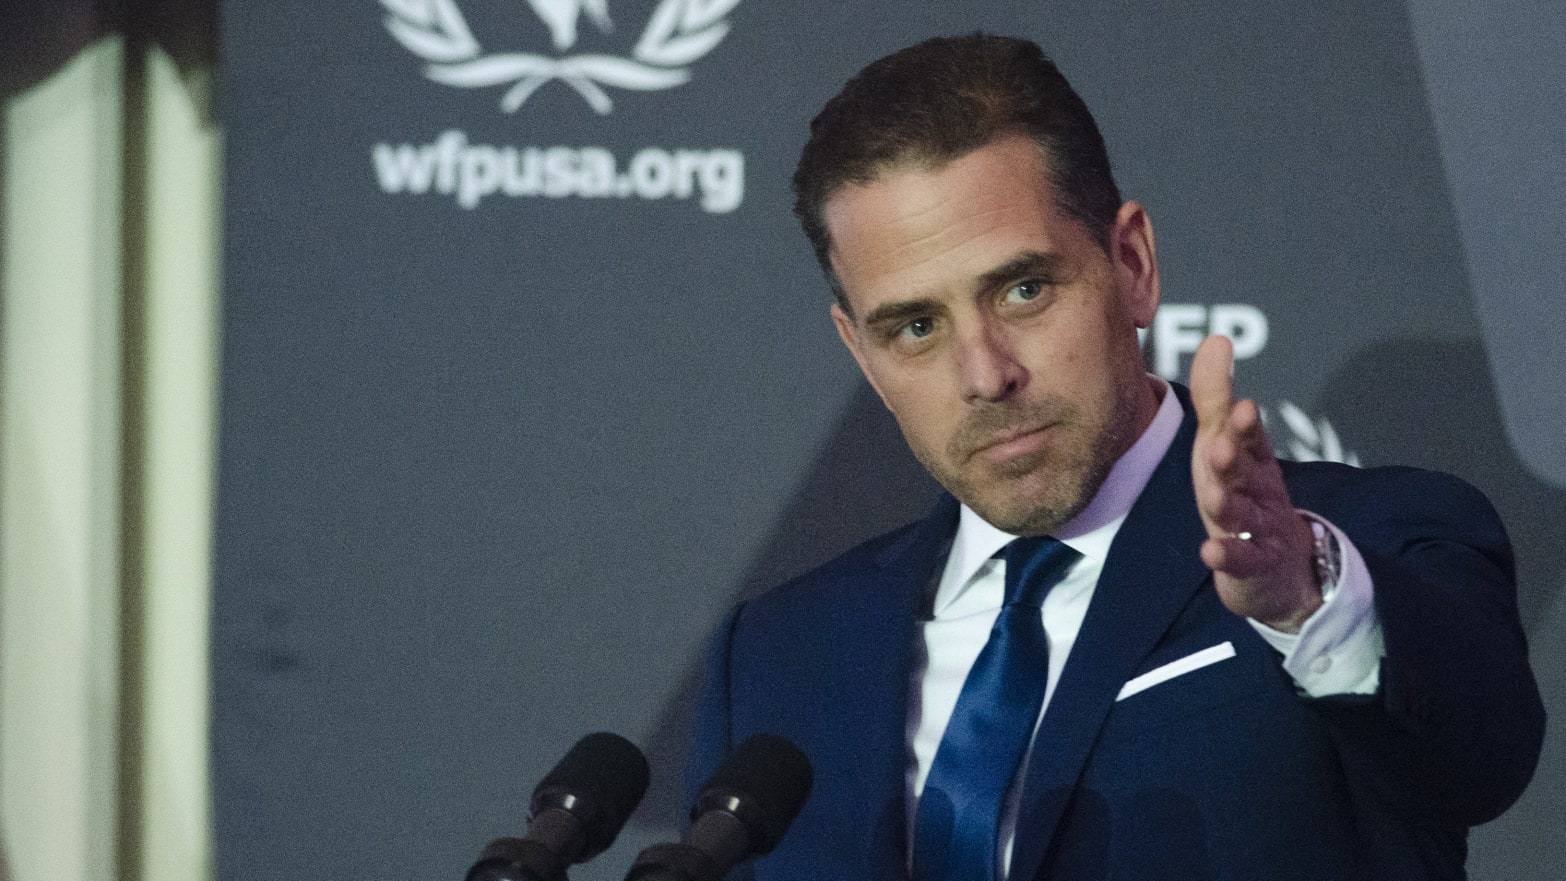 Hunter Biden speaks during the World Food Program USA’s 2016 McGovern-Dole Leadership Award Ceremony  at the Organization of American States on April 12, 2016, in Washington, D.C.